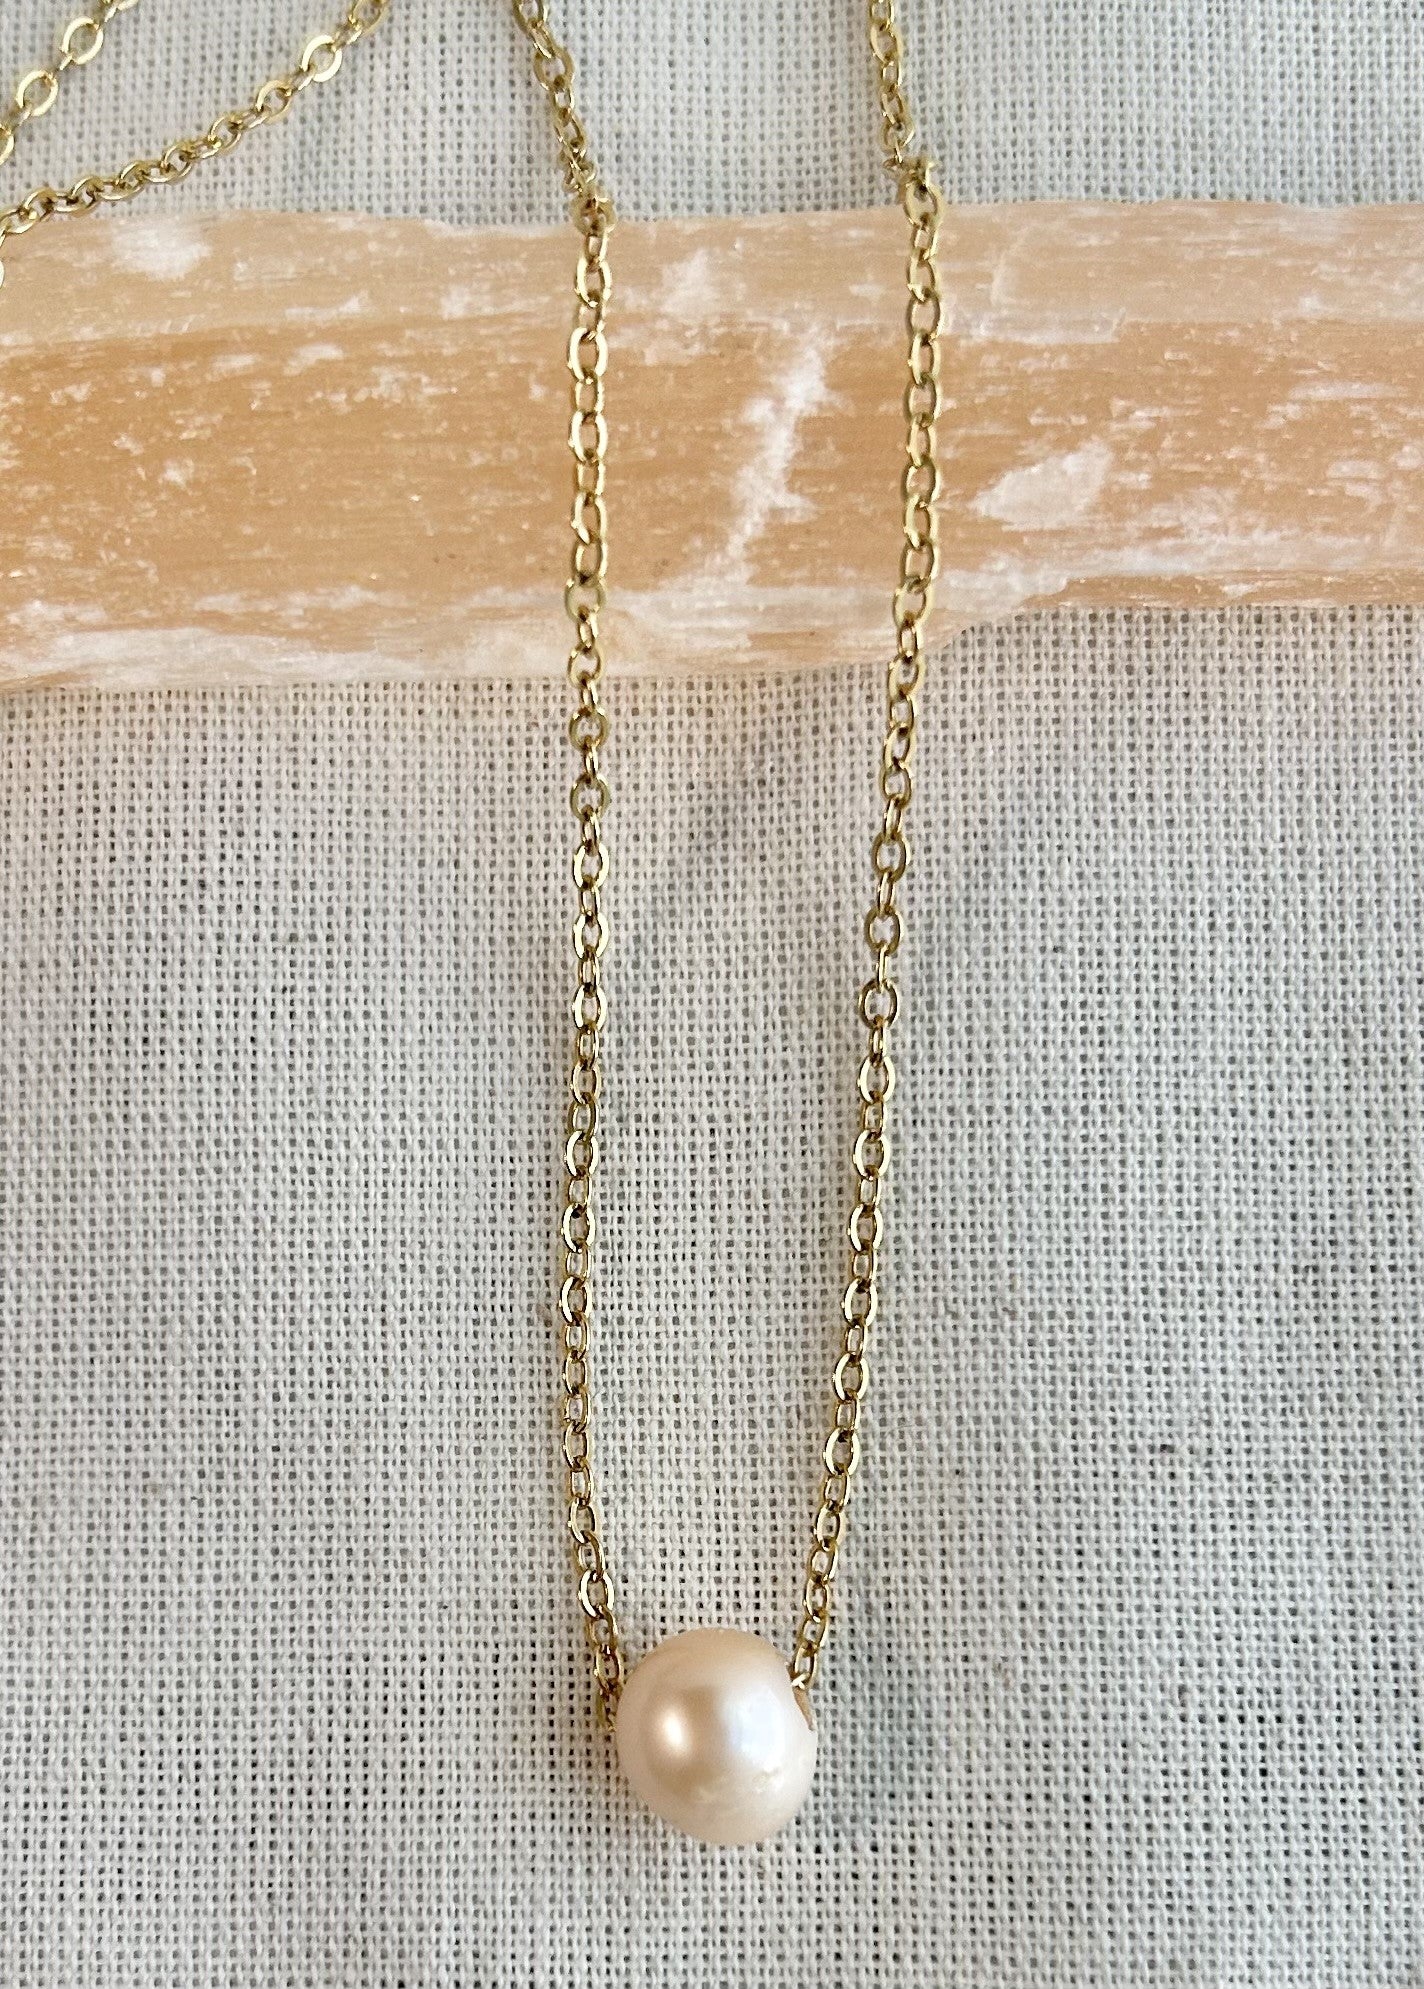 Peach Pearl Slide Necklace